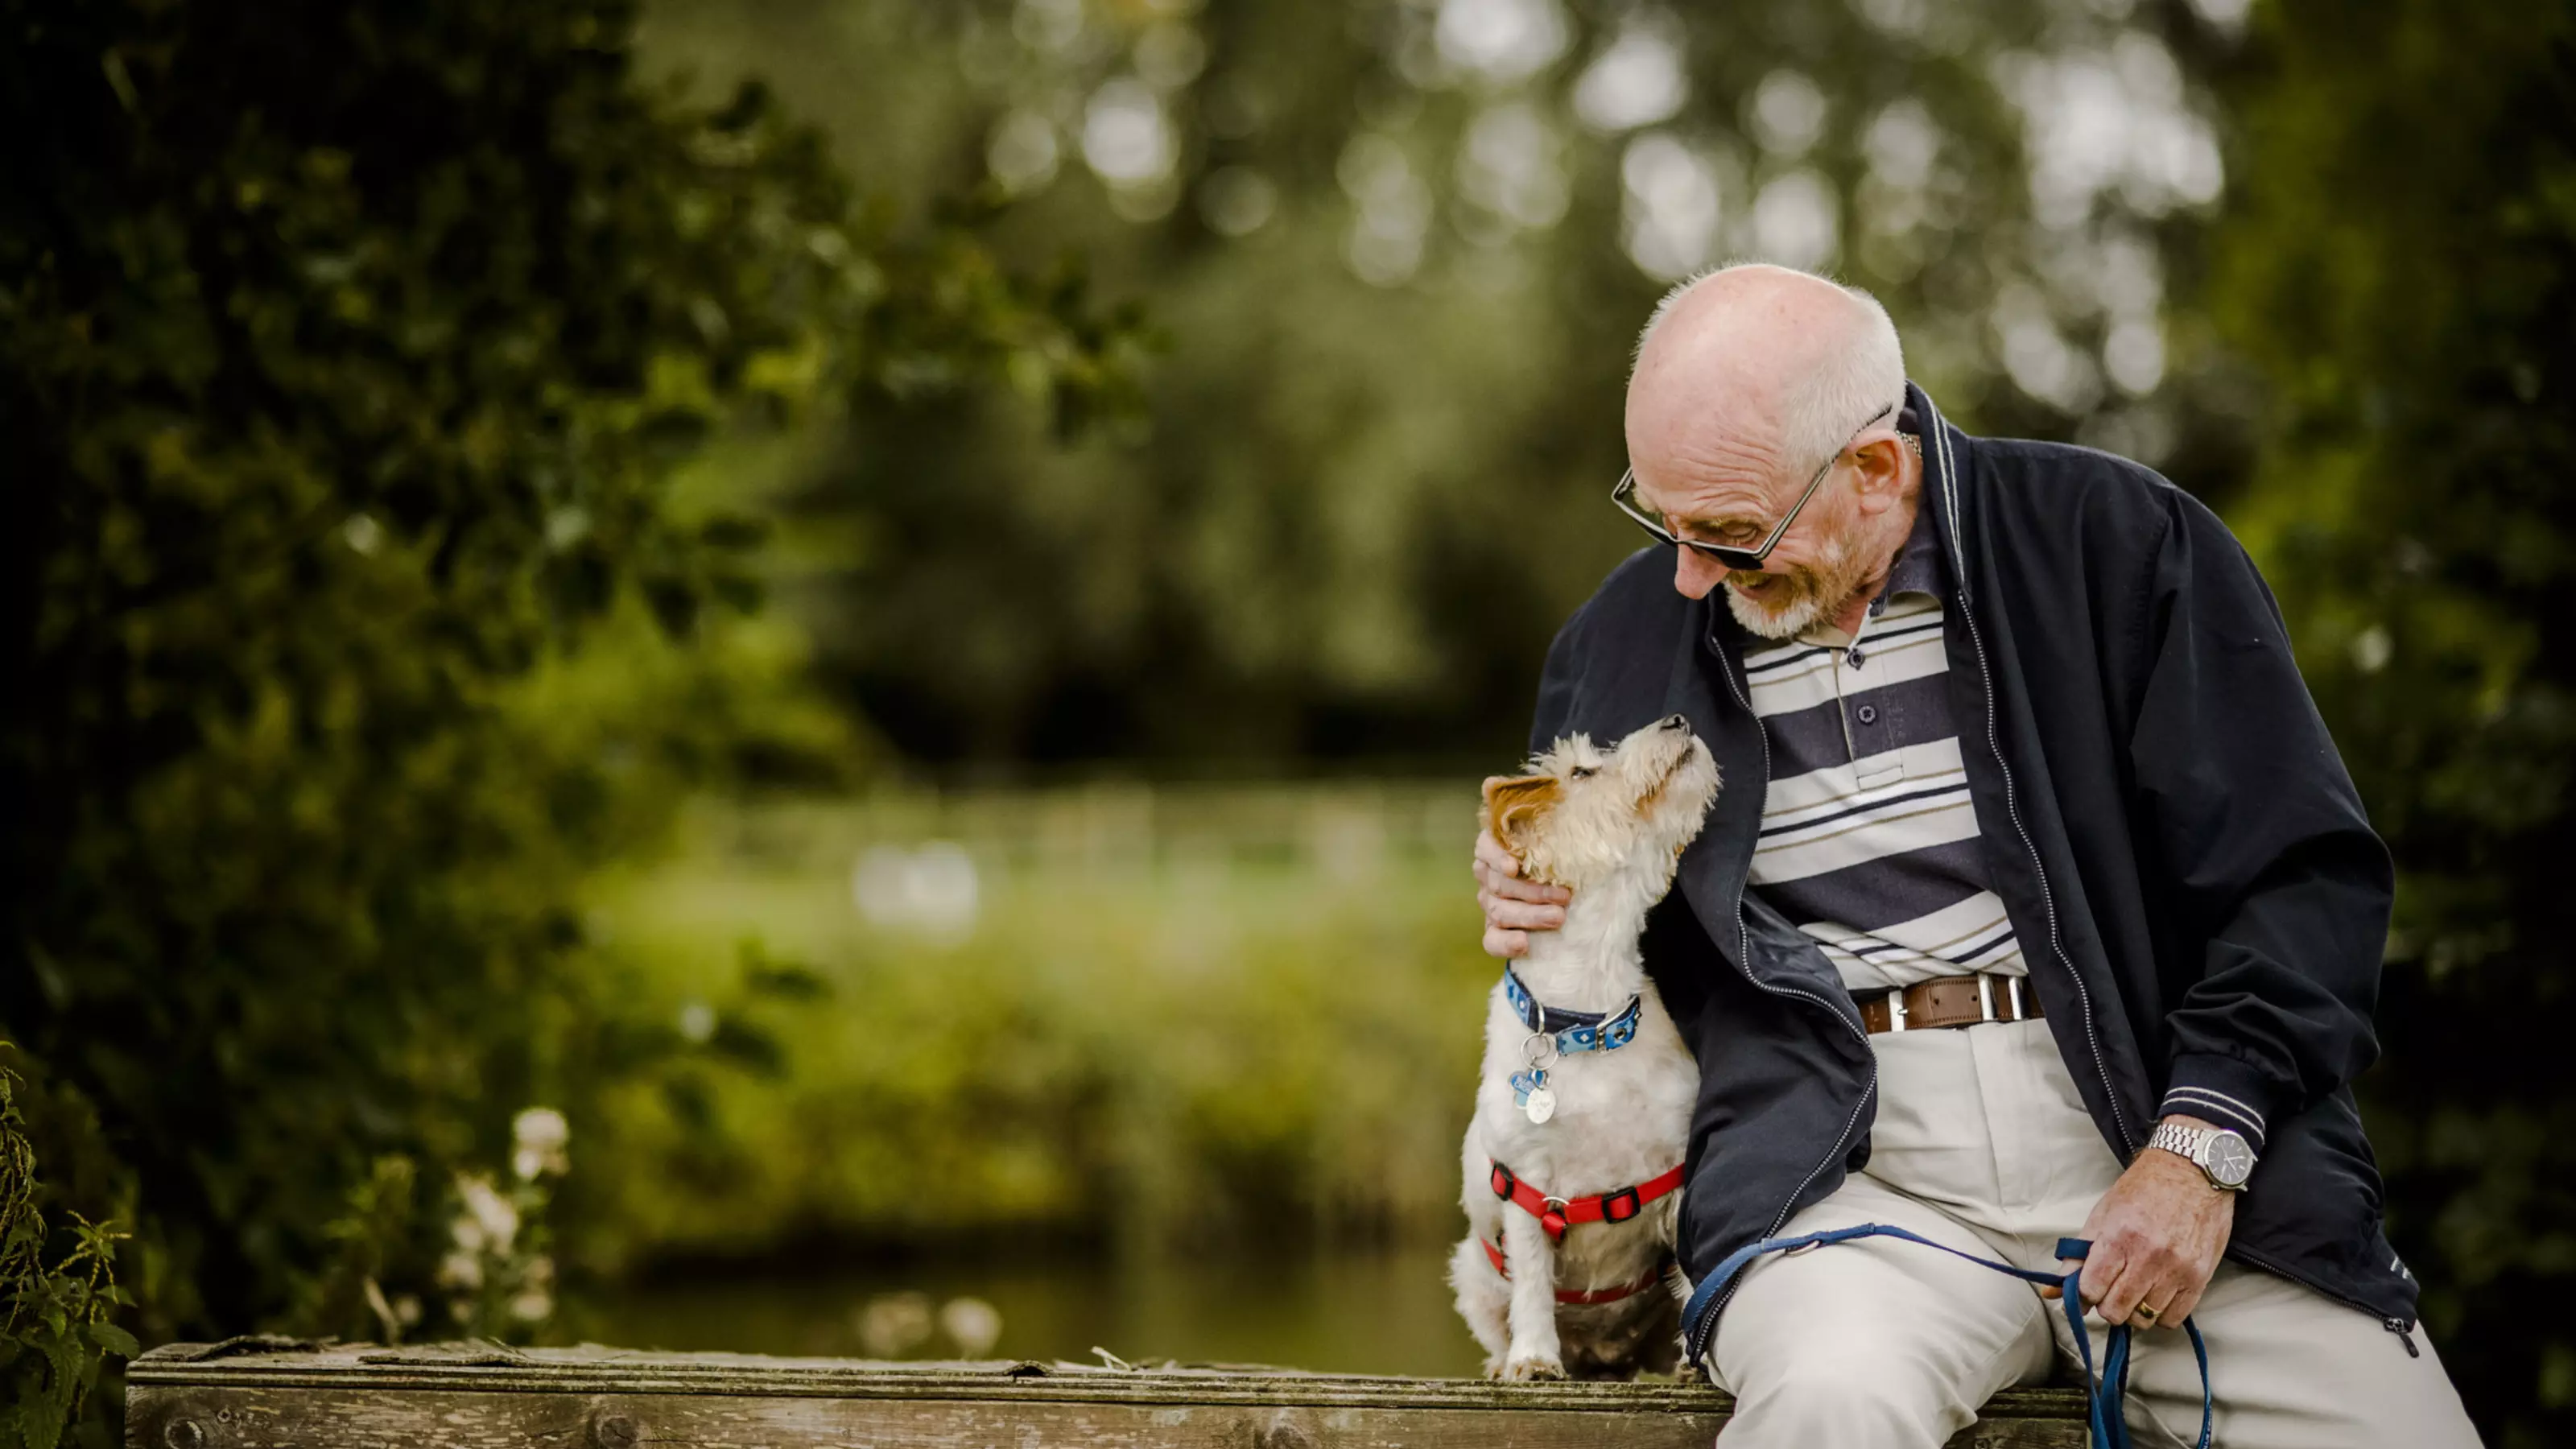 Photo of a jack russell terrier sitting next to a man. They are both looking at each other and smiling.